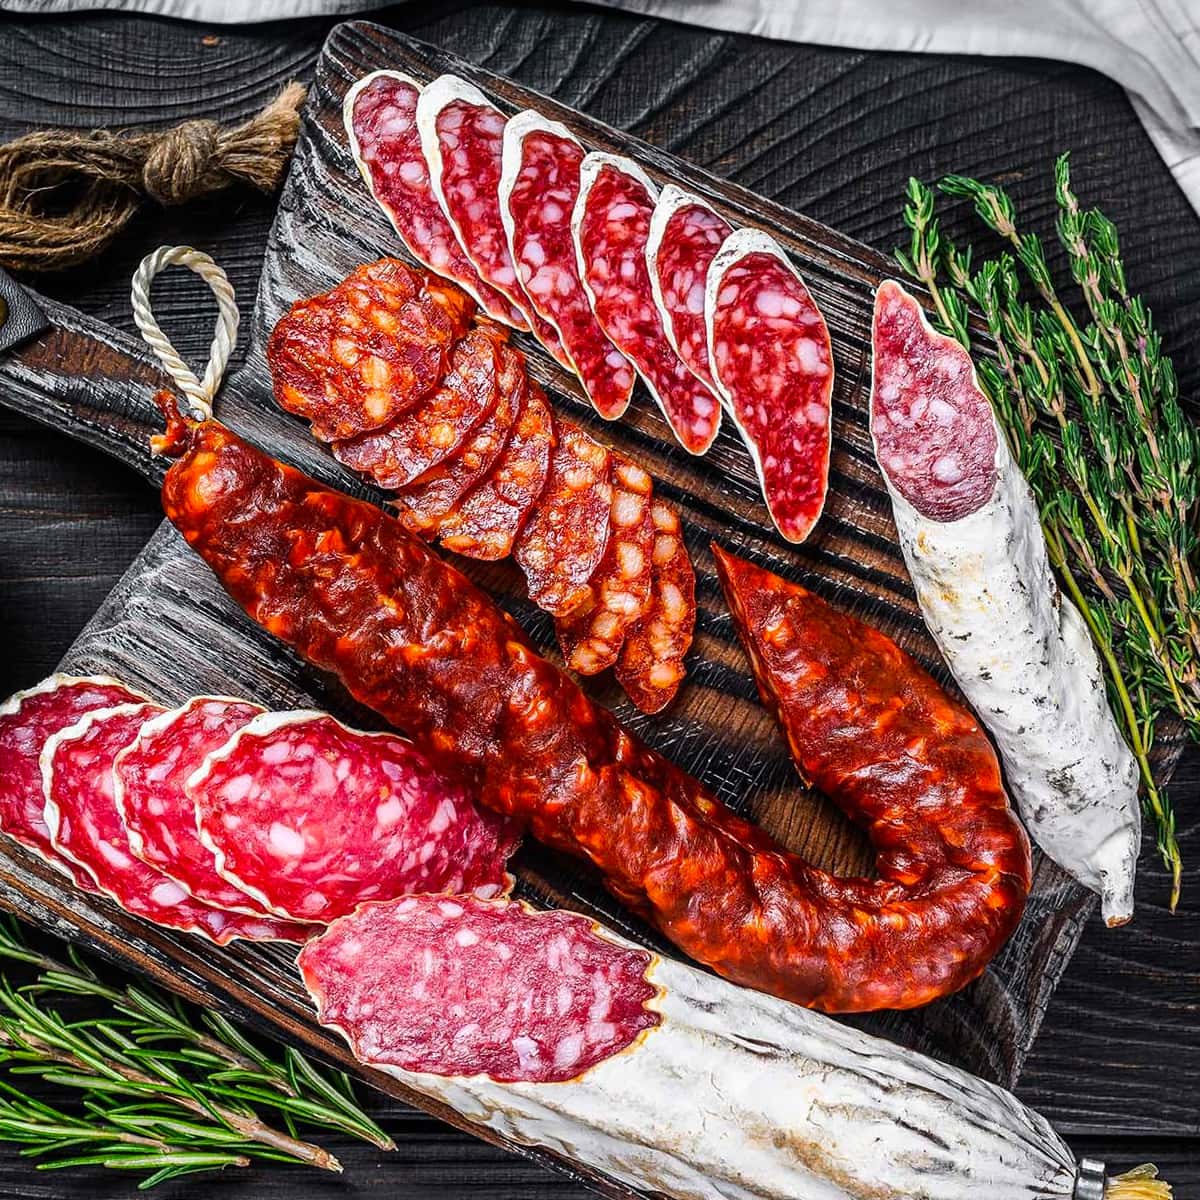 Top view of different types of salami near aromatic herbs.